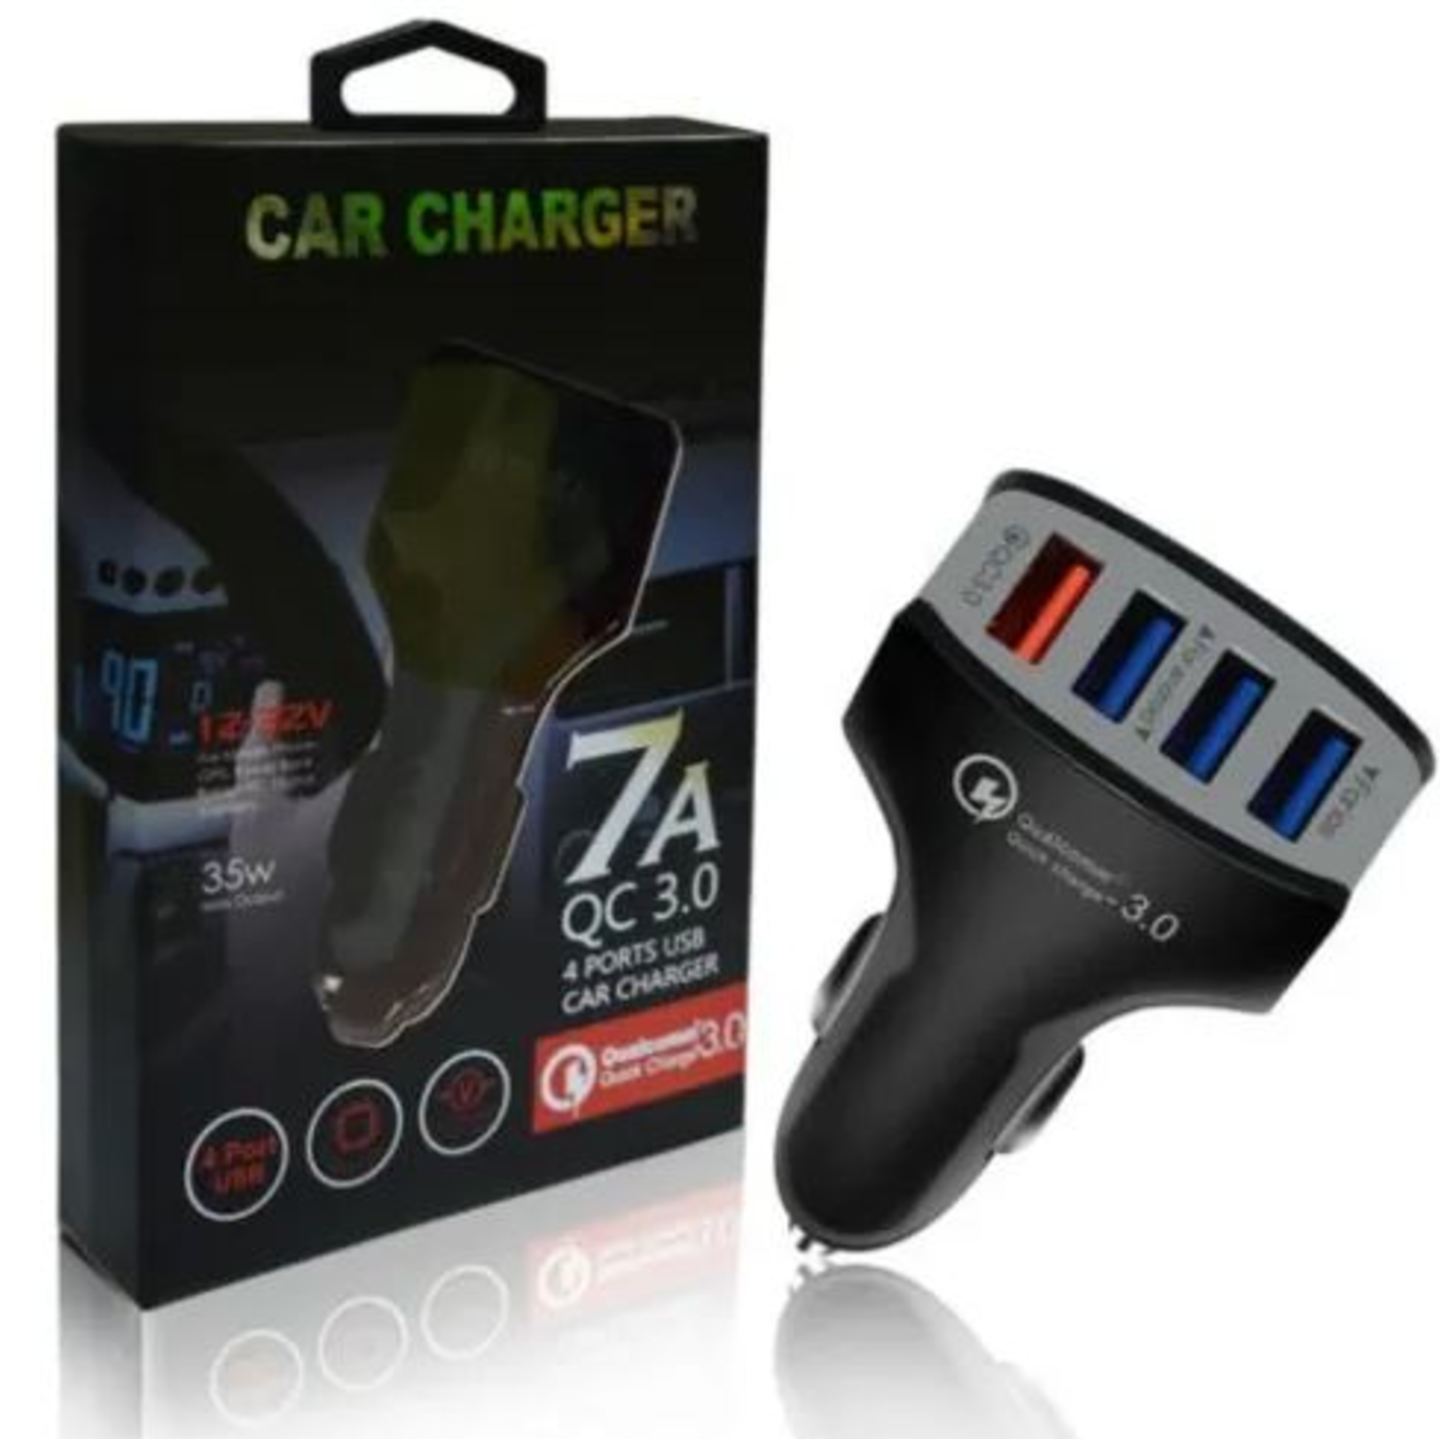 7A Car Charger